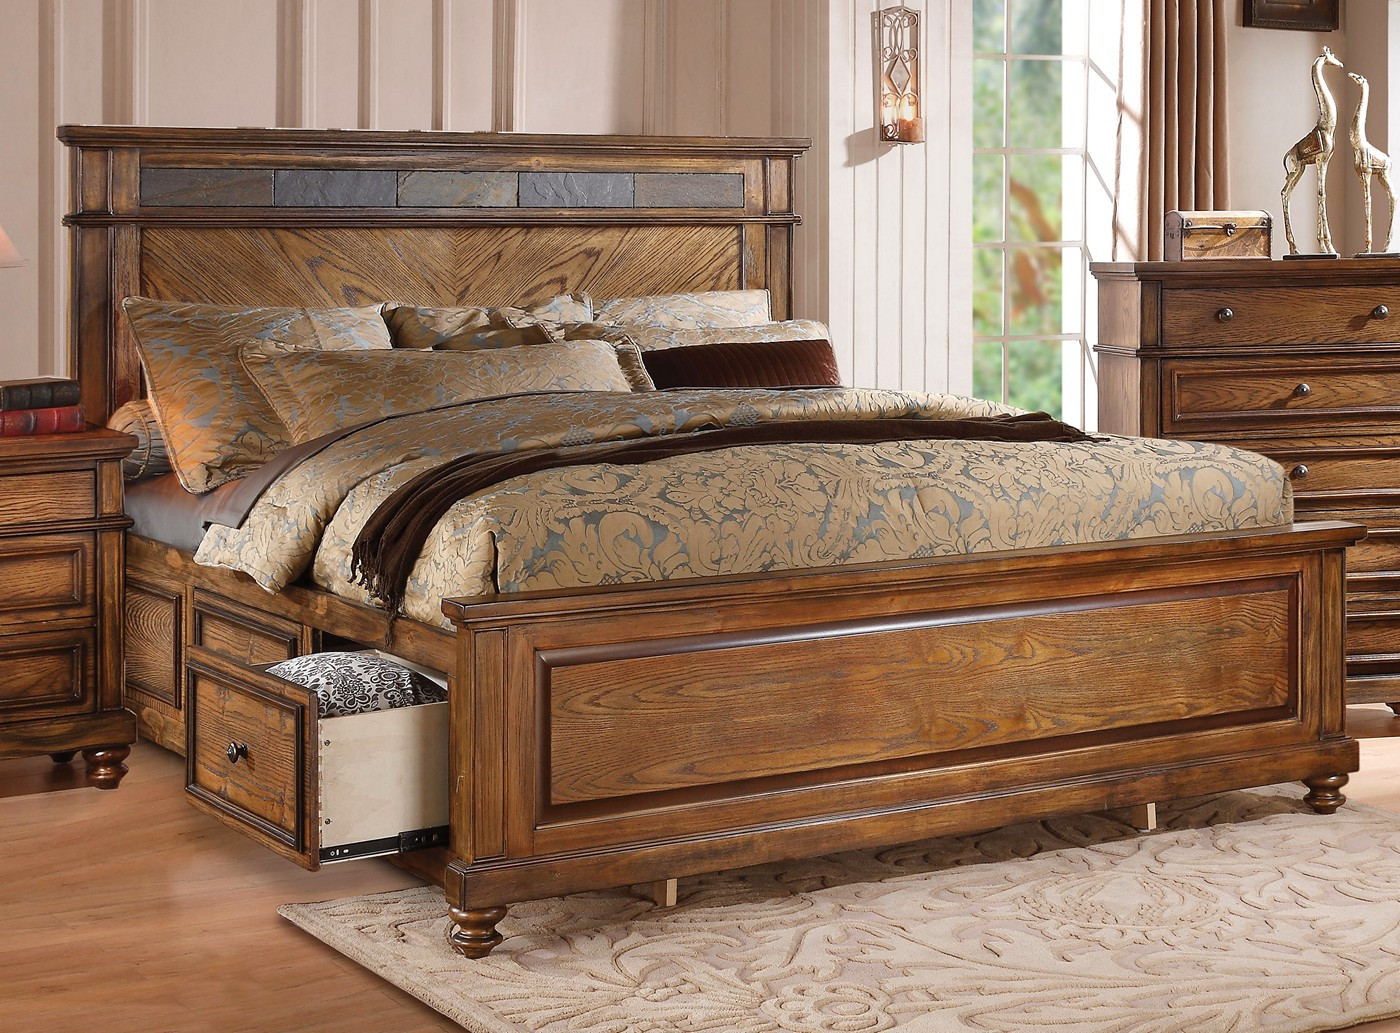 King Bedroom Sets With Storage
 Abilene Rustic 4 pc King Storage Bed Set with Stone Accent